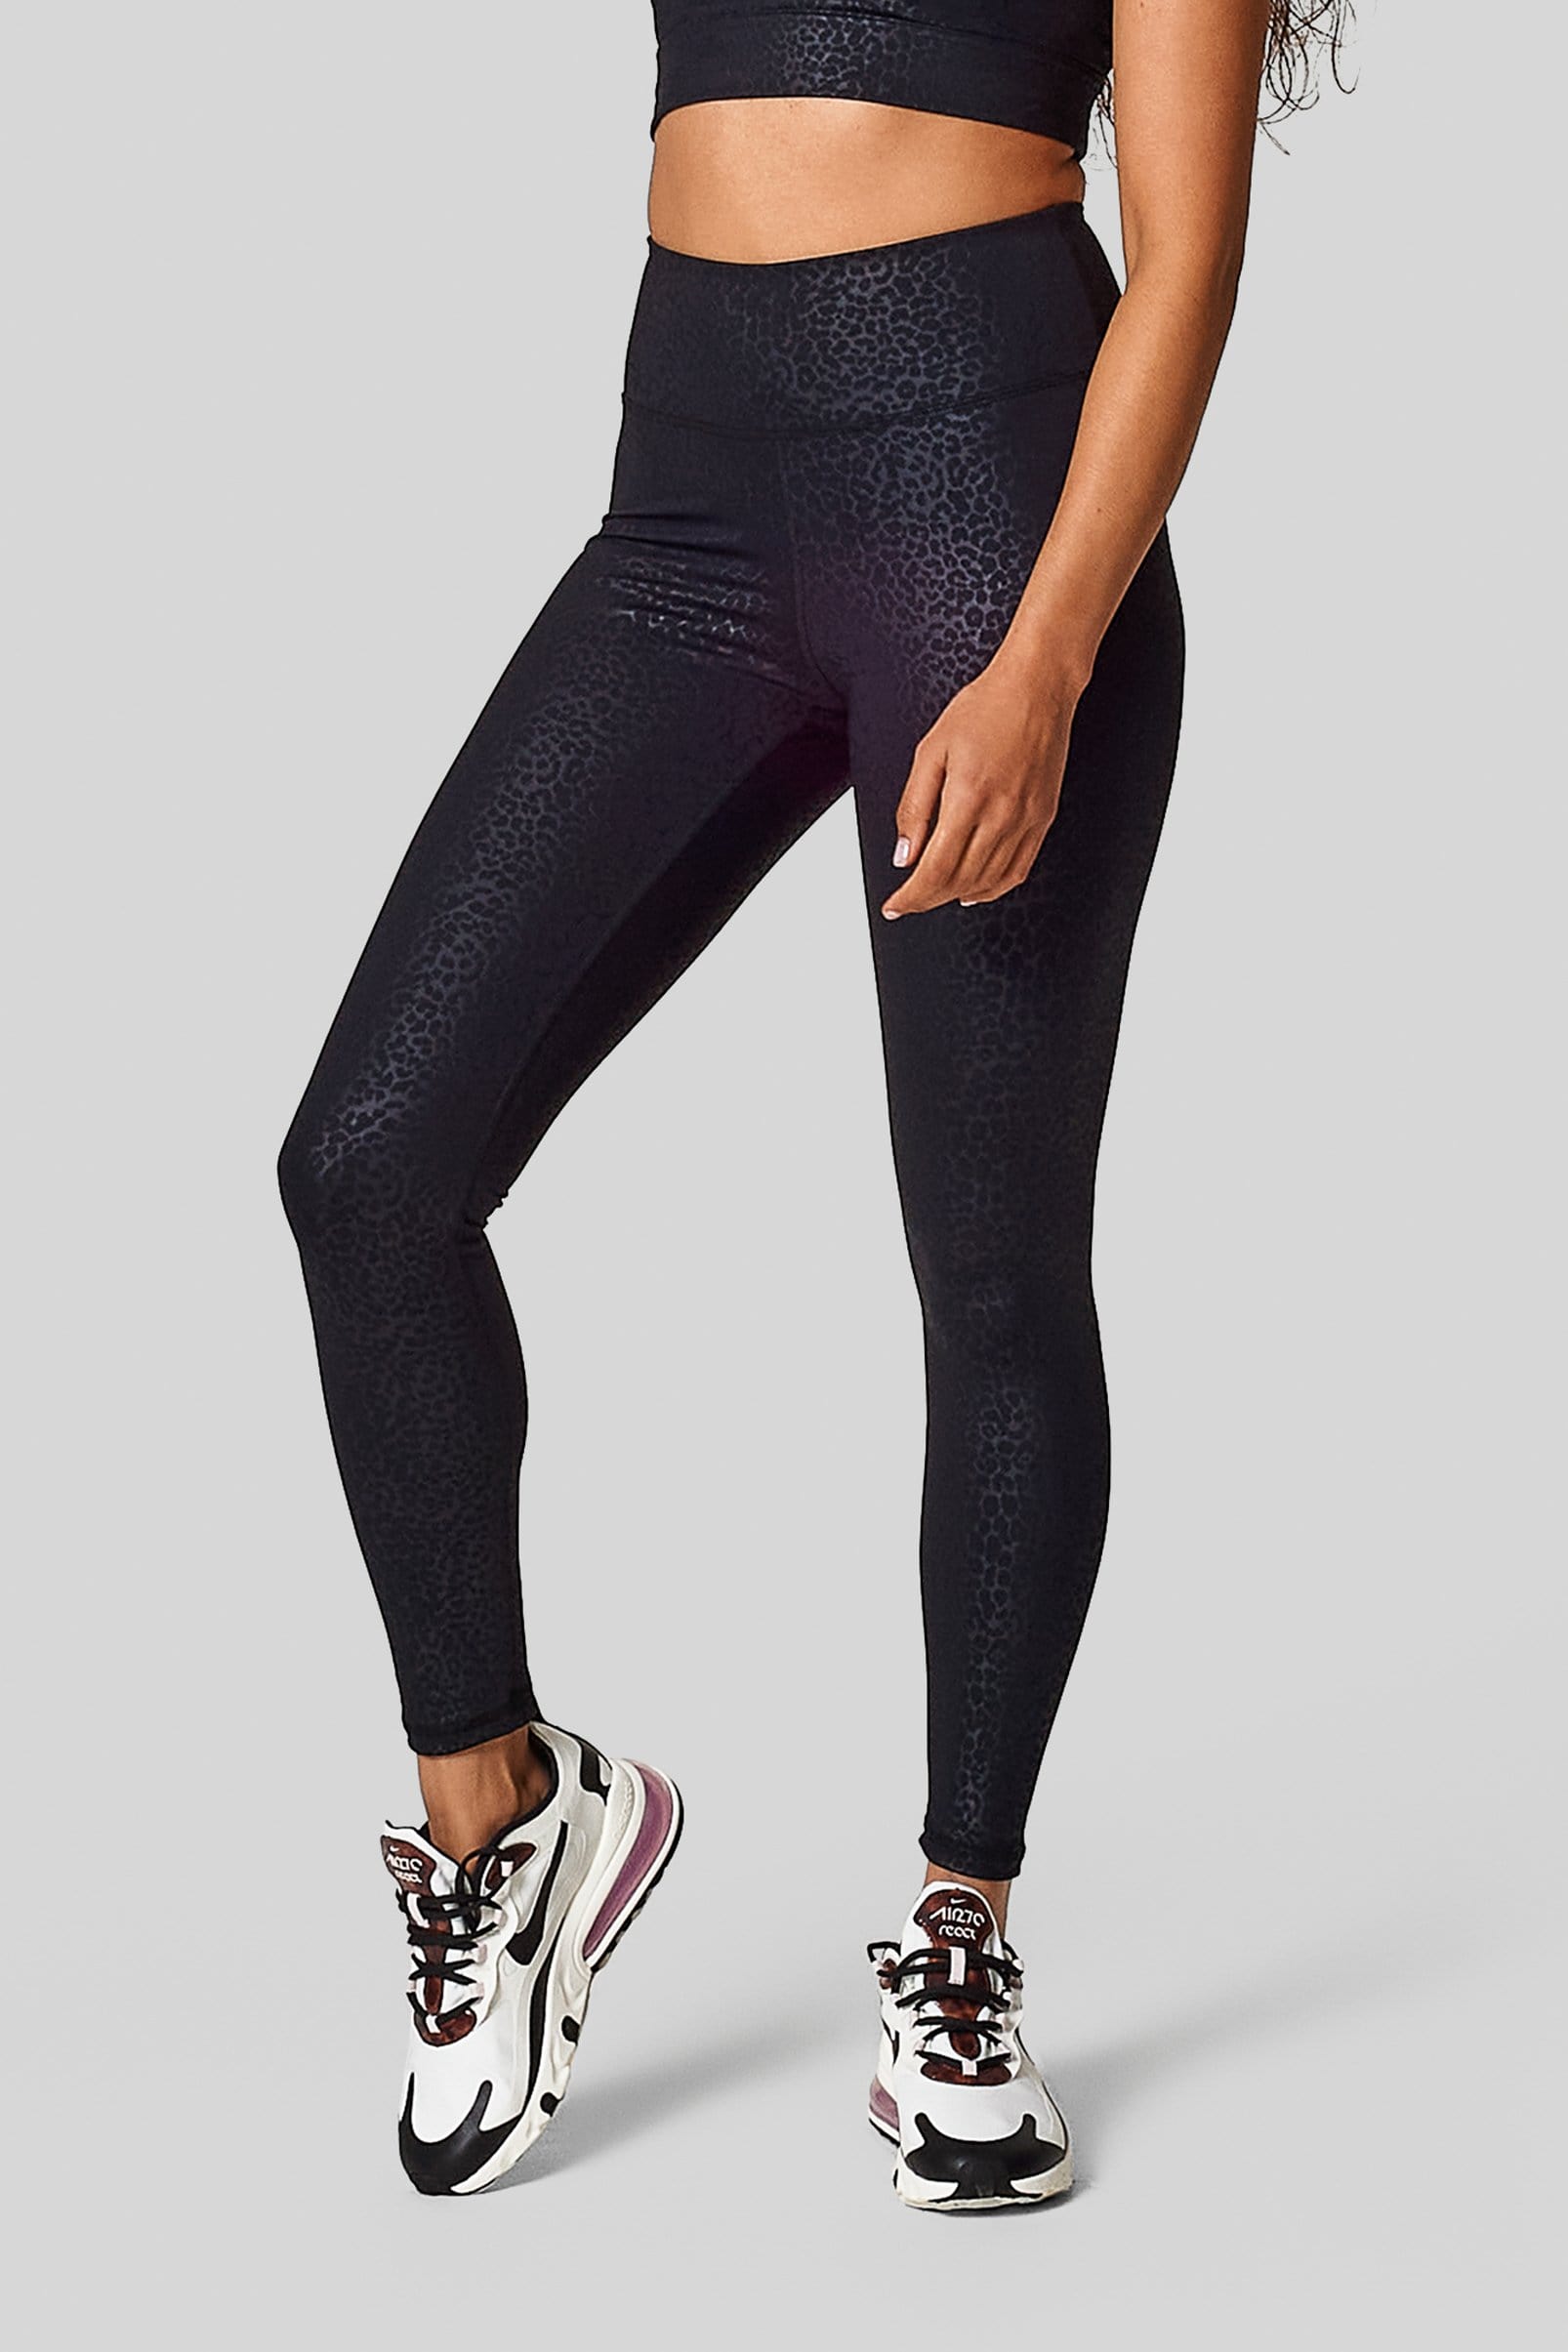 A woman wears new nikes with a pair of black Cheetah print high waisted leggings.